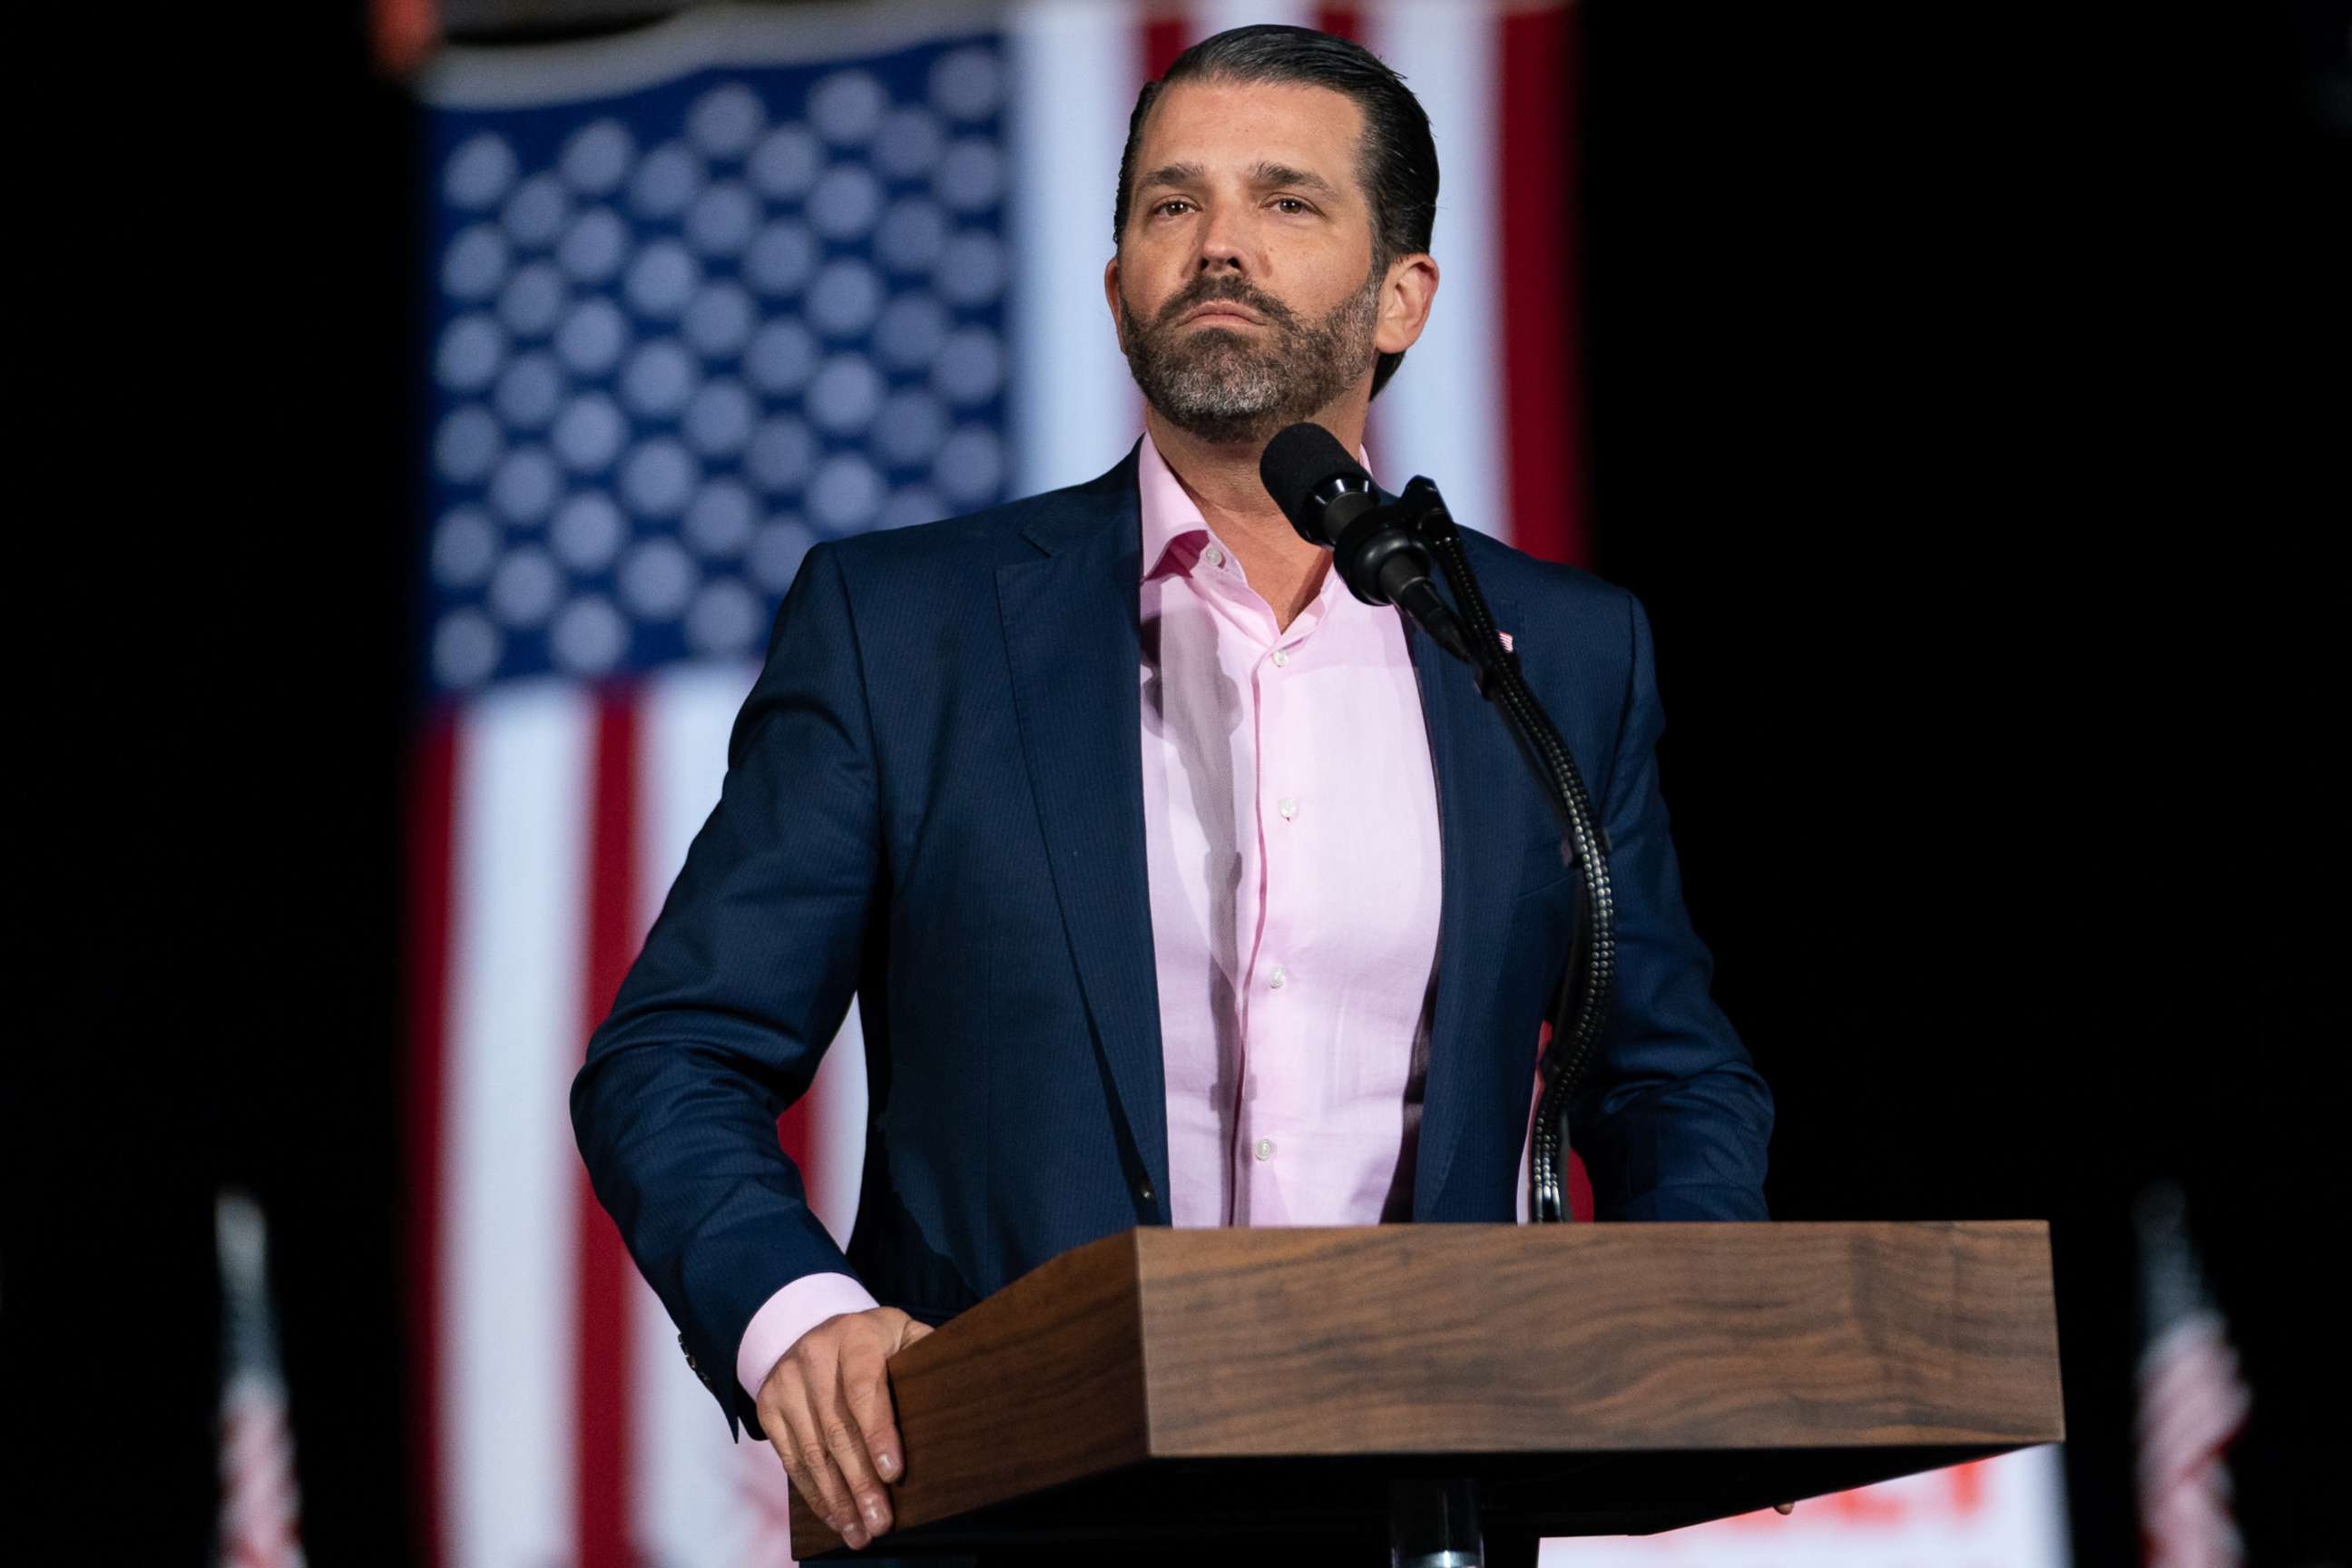 PHOTO: Donald Trump Jr., executive vice president of development and acquisitions for Trump Organization Inc., speaks during a campaign rally in Dalton, Ga., Jan. 4, 2021.